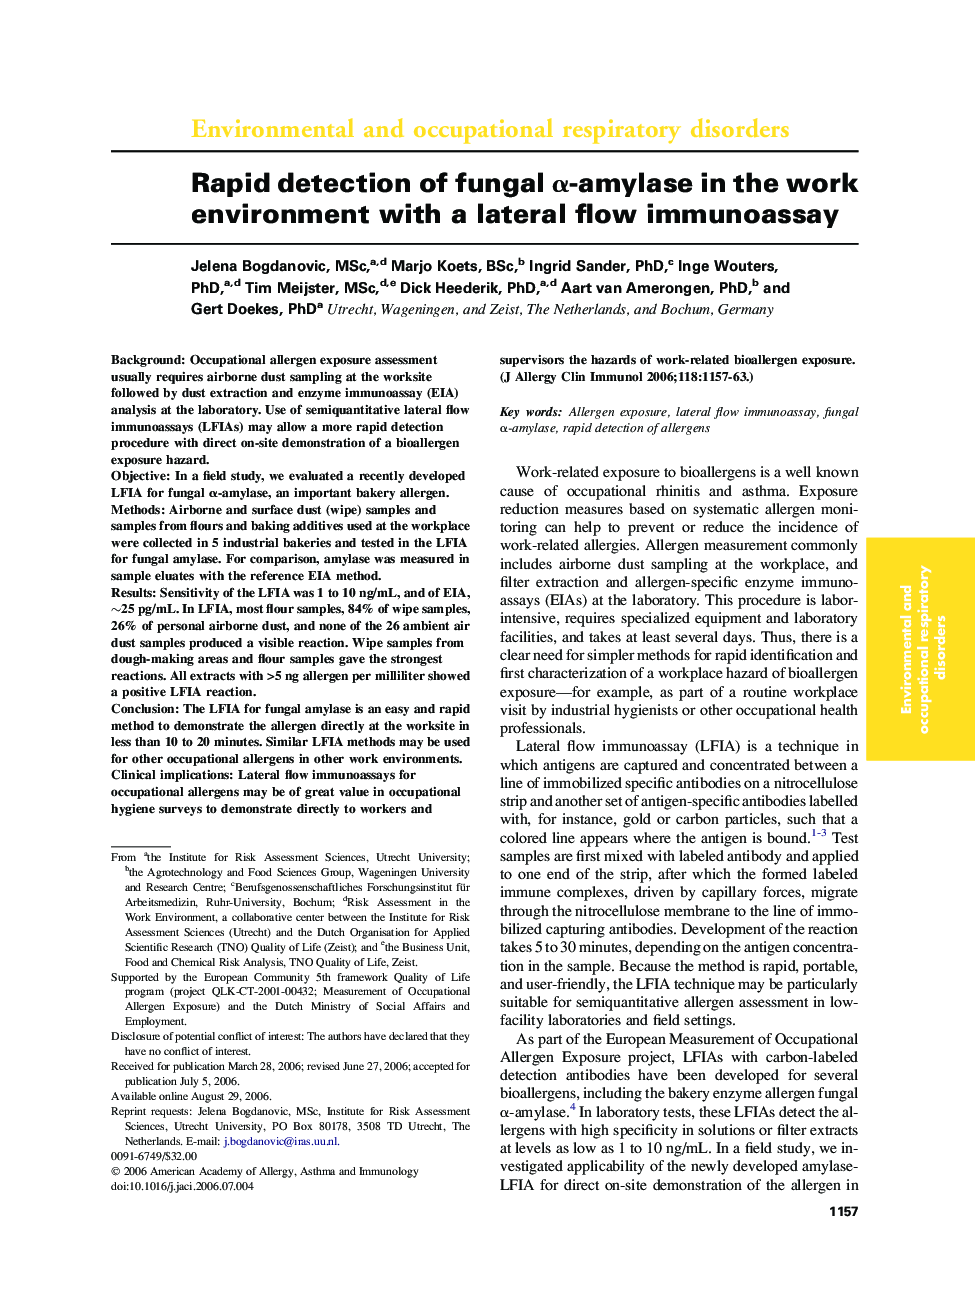 Rapid detection of fungal Î±-amylase in the work environment with a lateral flow immunoassay